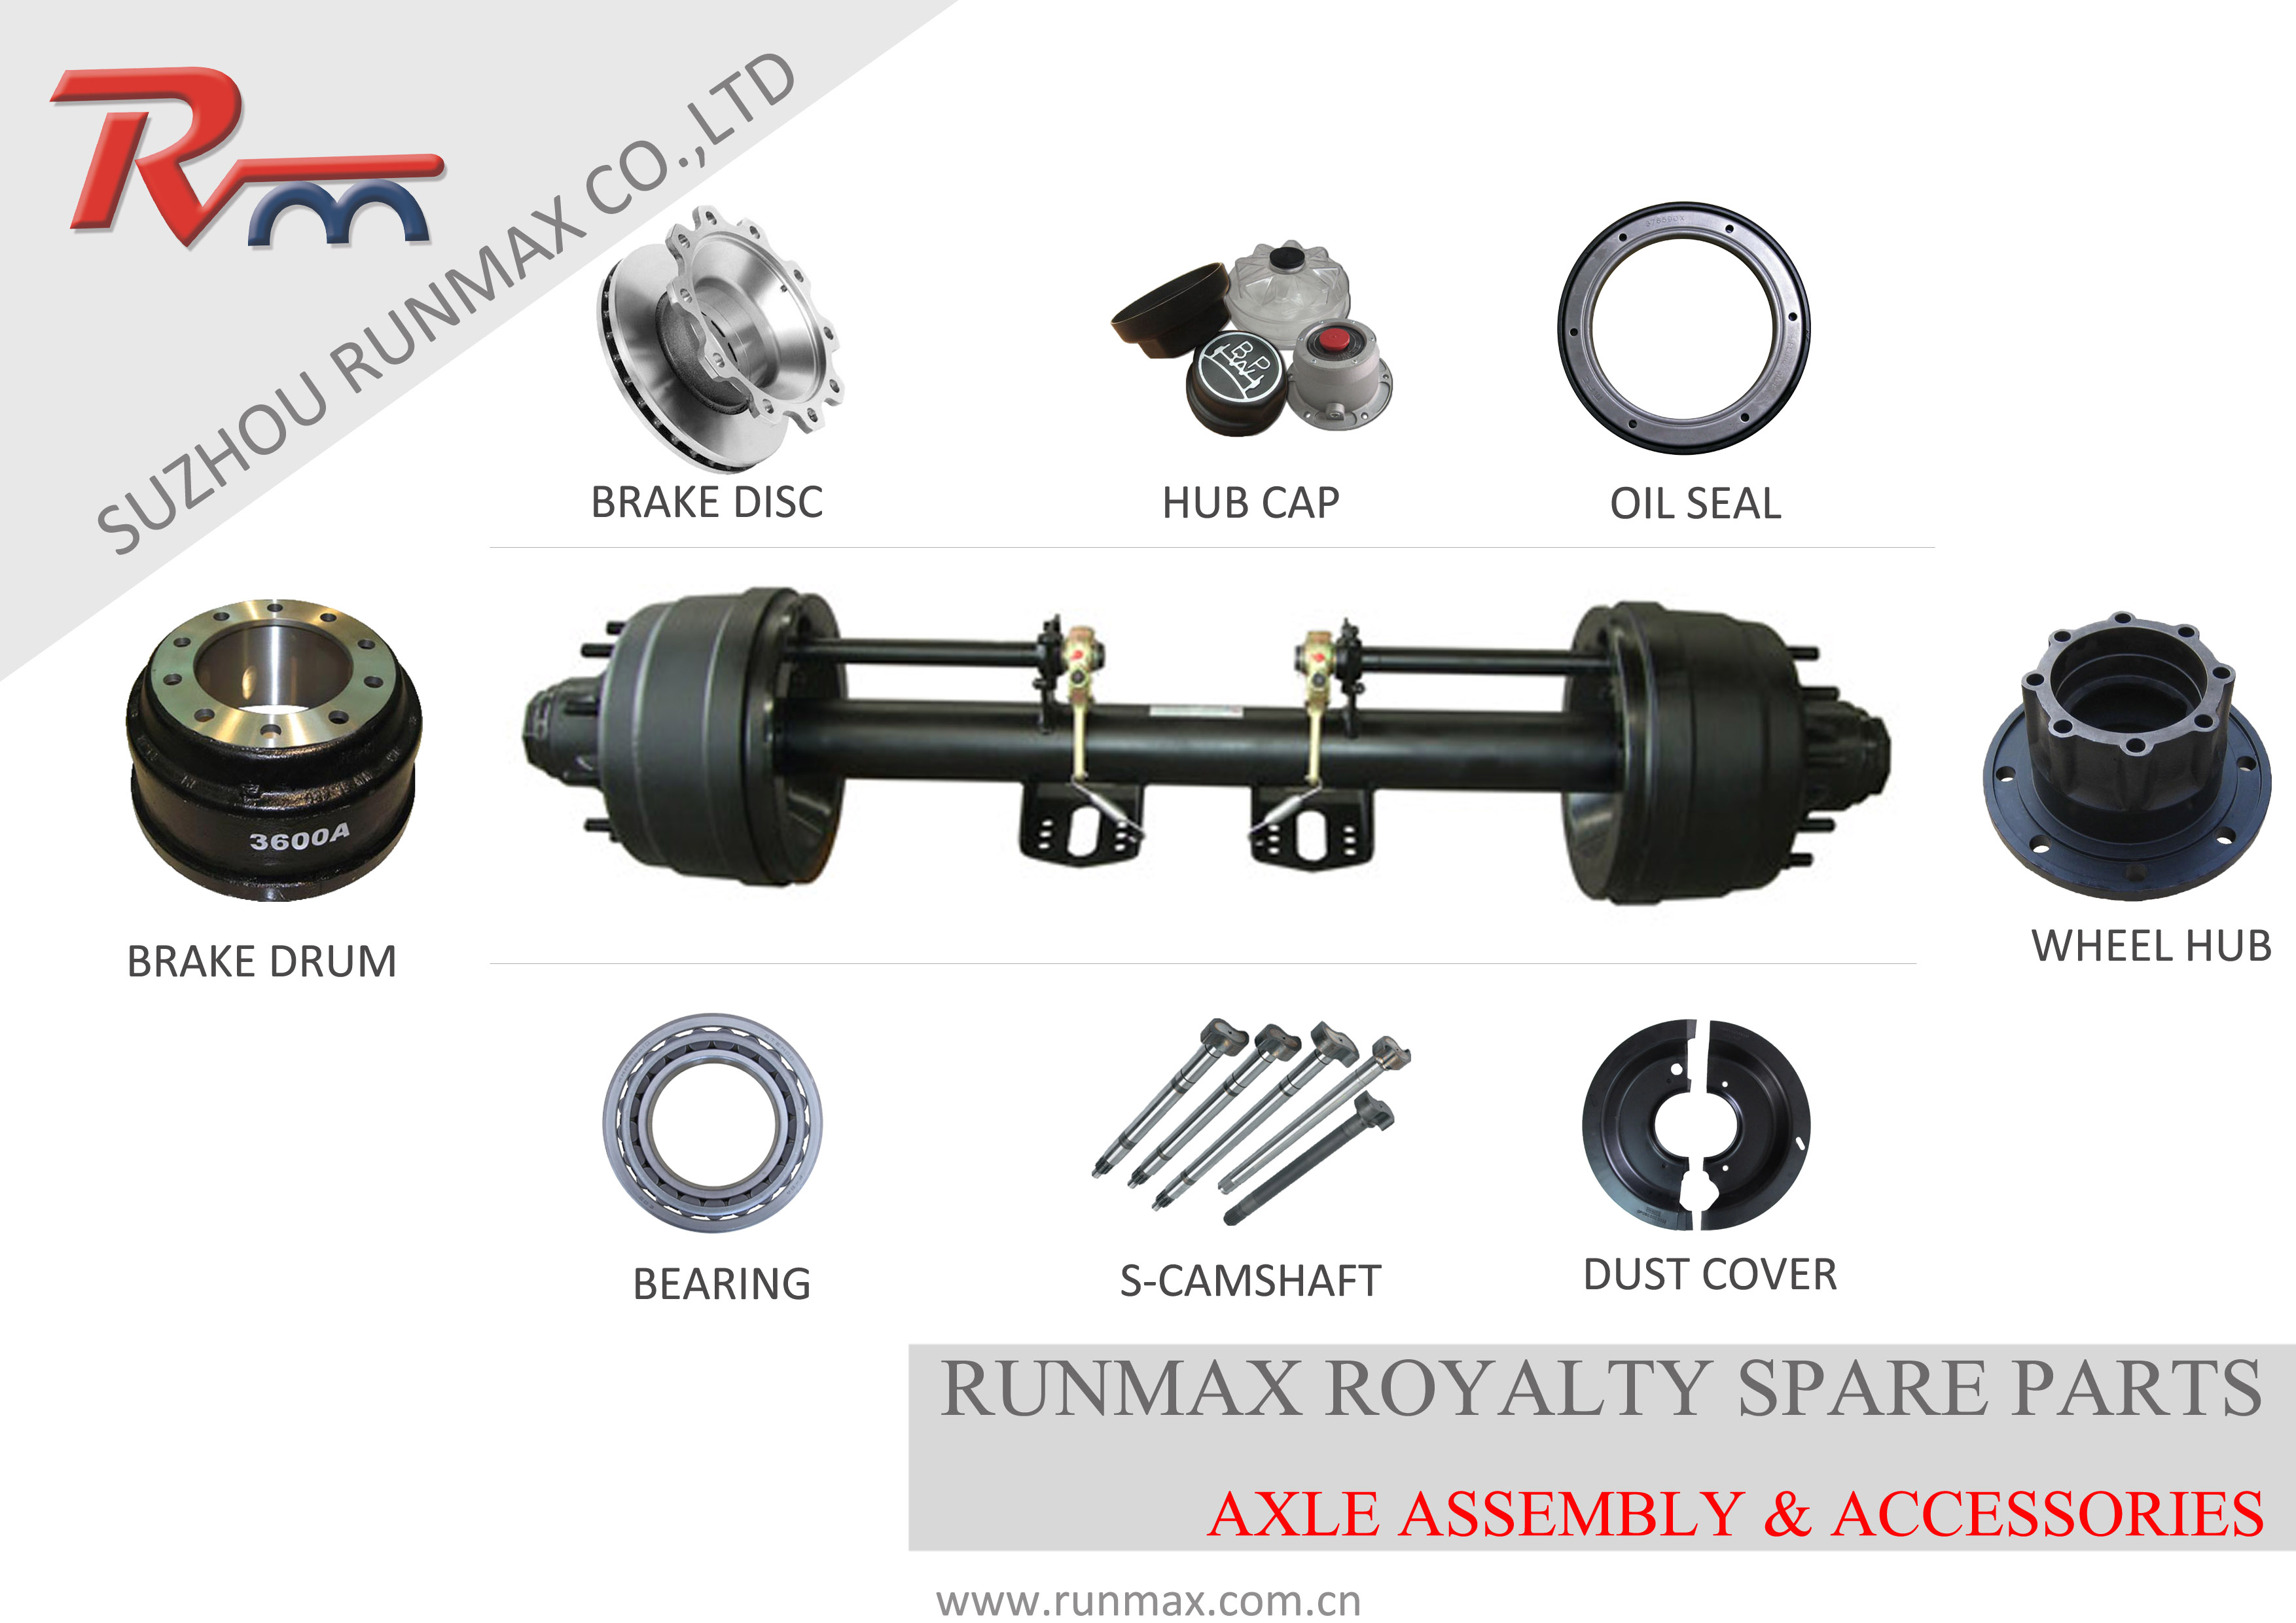 RUNMAX AXLE ASSEMBLY AND ACCESSORIES